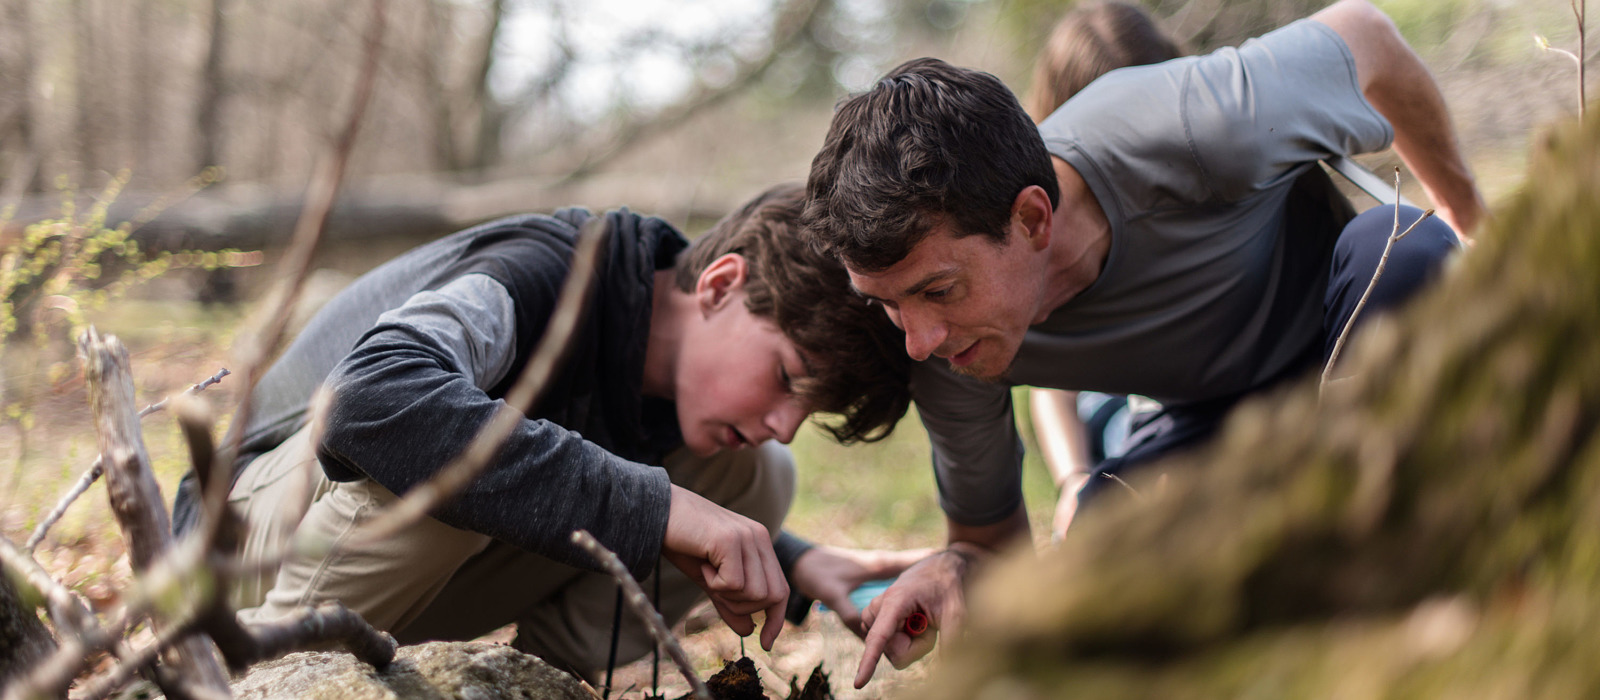 A Harris Center naturalist and a middle school student search for insects together. (photo © Ben Conant)